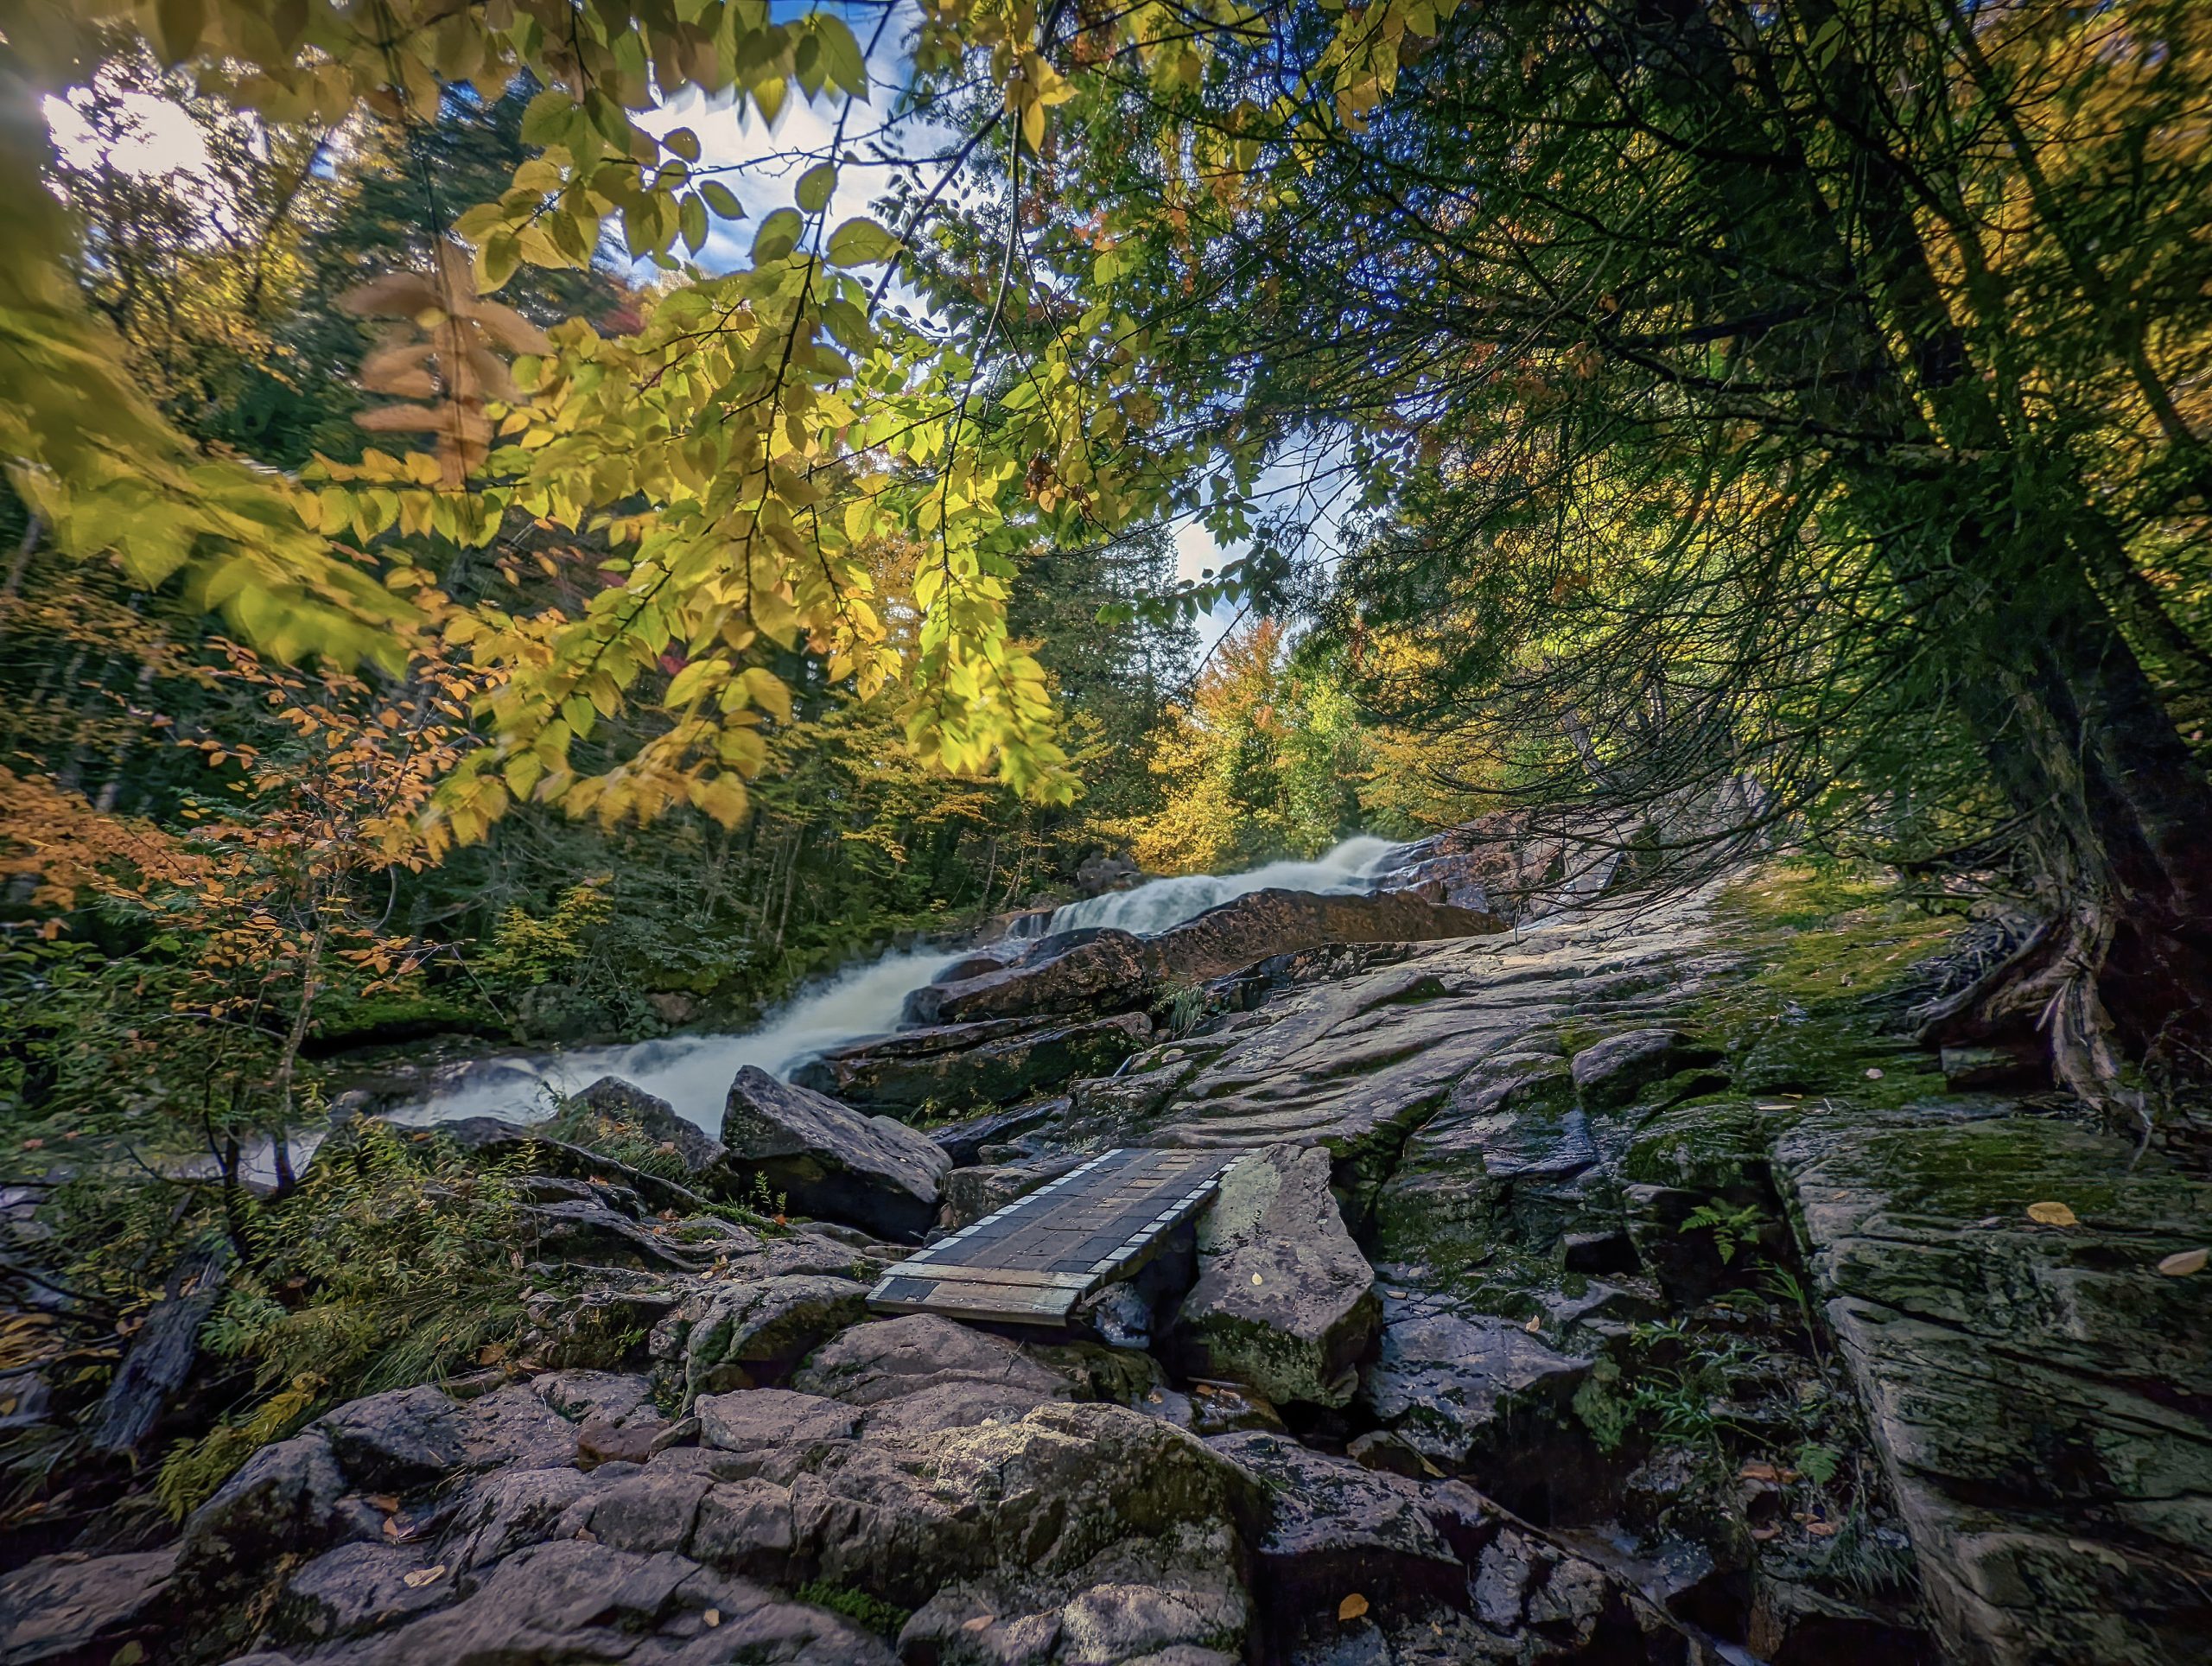 Landscape of the Légende trail, one of the most epic trails in Quebec, with its rocky course, waterfall and lush greenery.